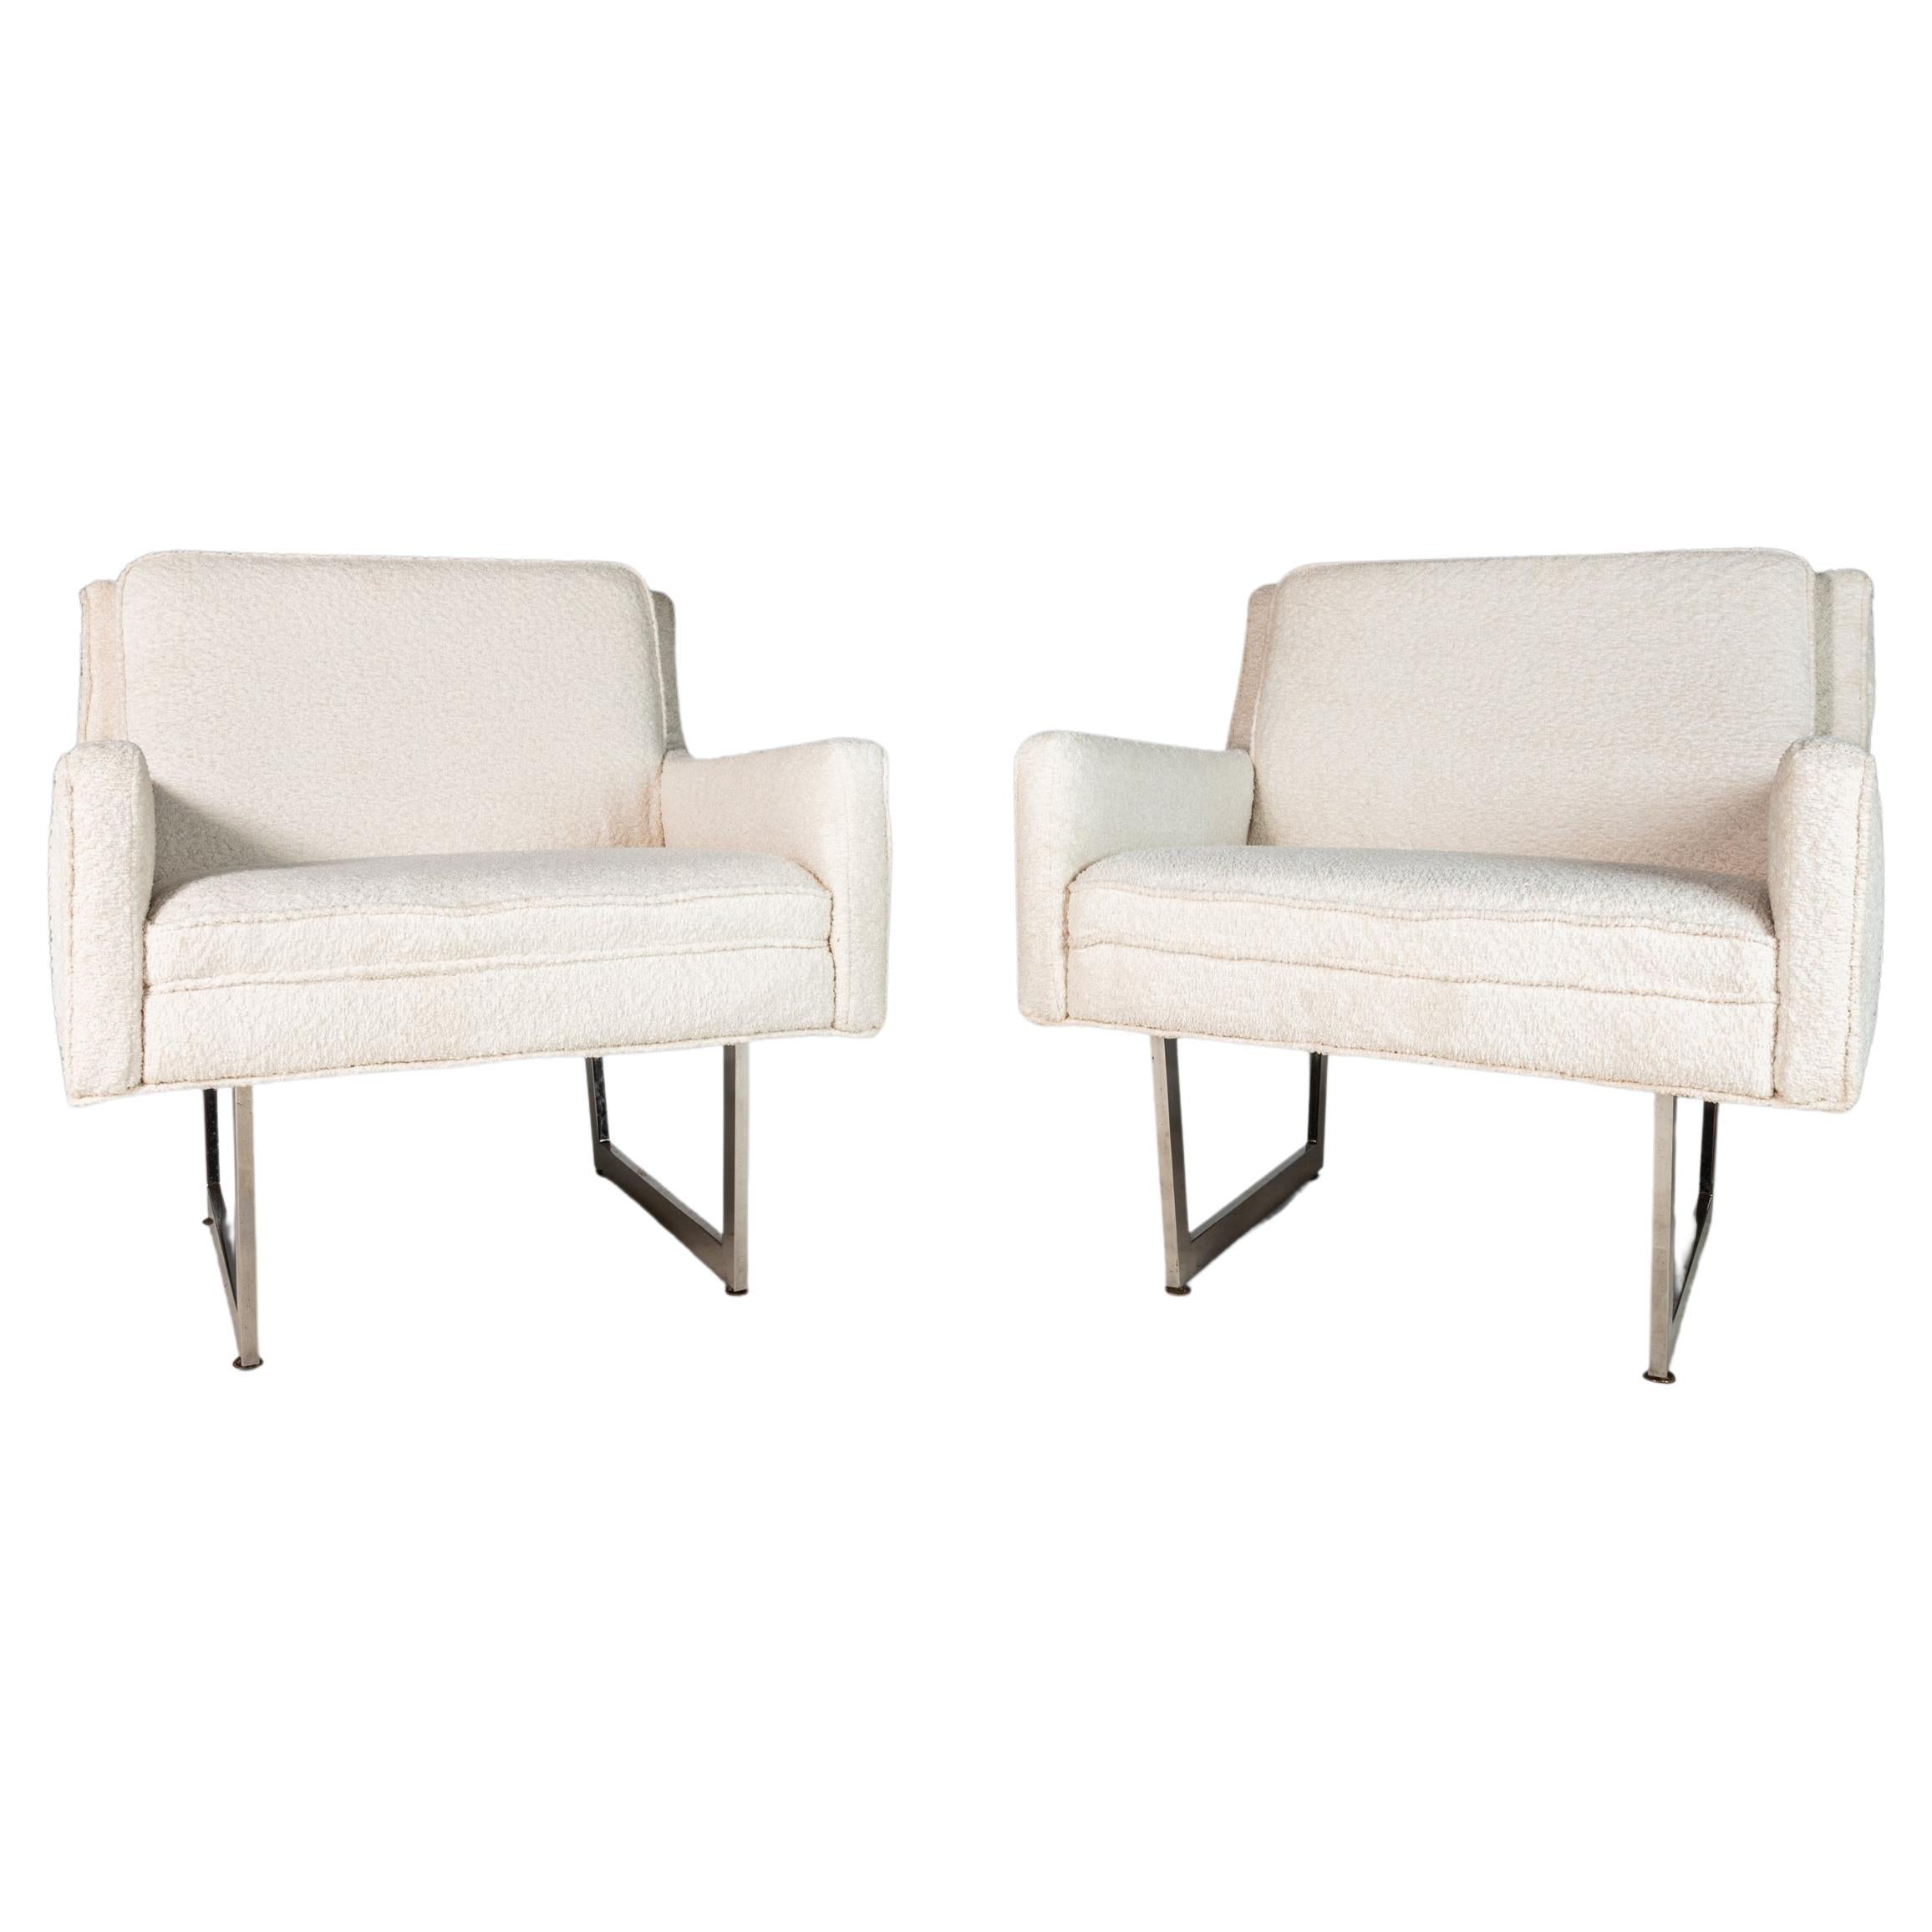 Pair Lounge Chairs Set on Chrome Bases by Patrician Furniture Co., USA, c. 1960s For Sale